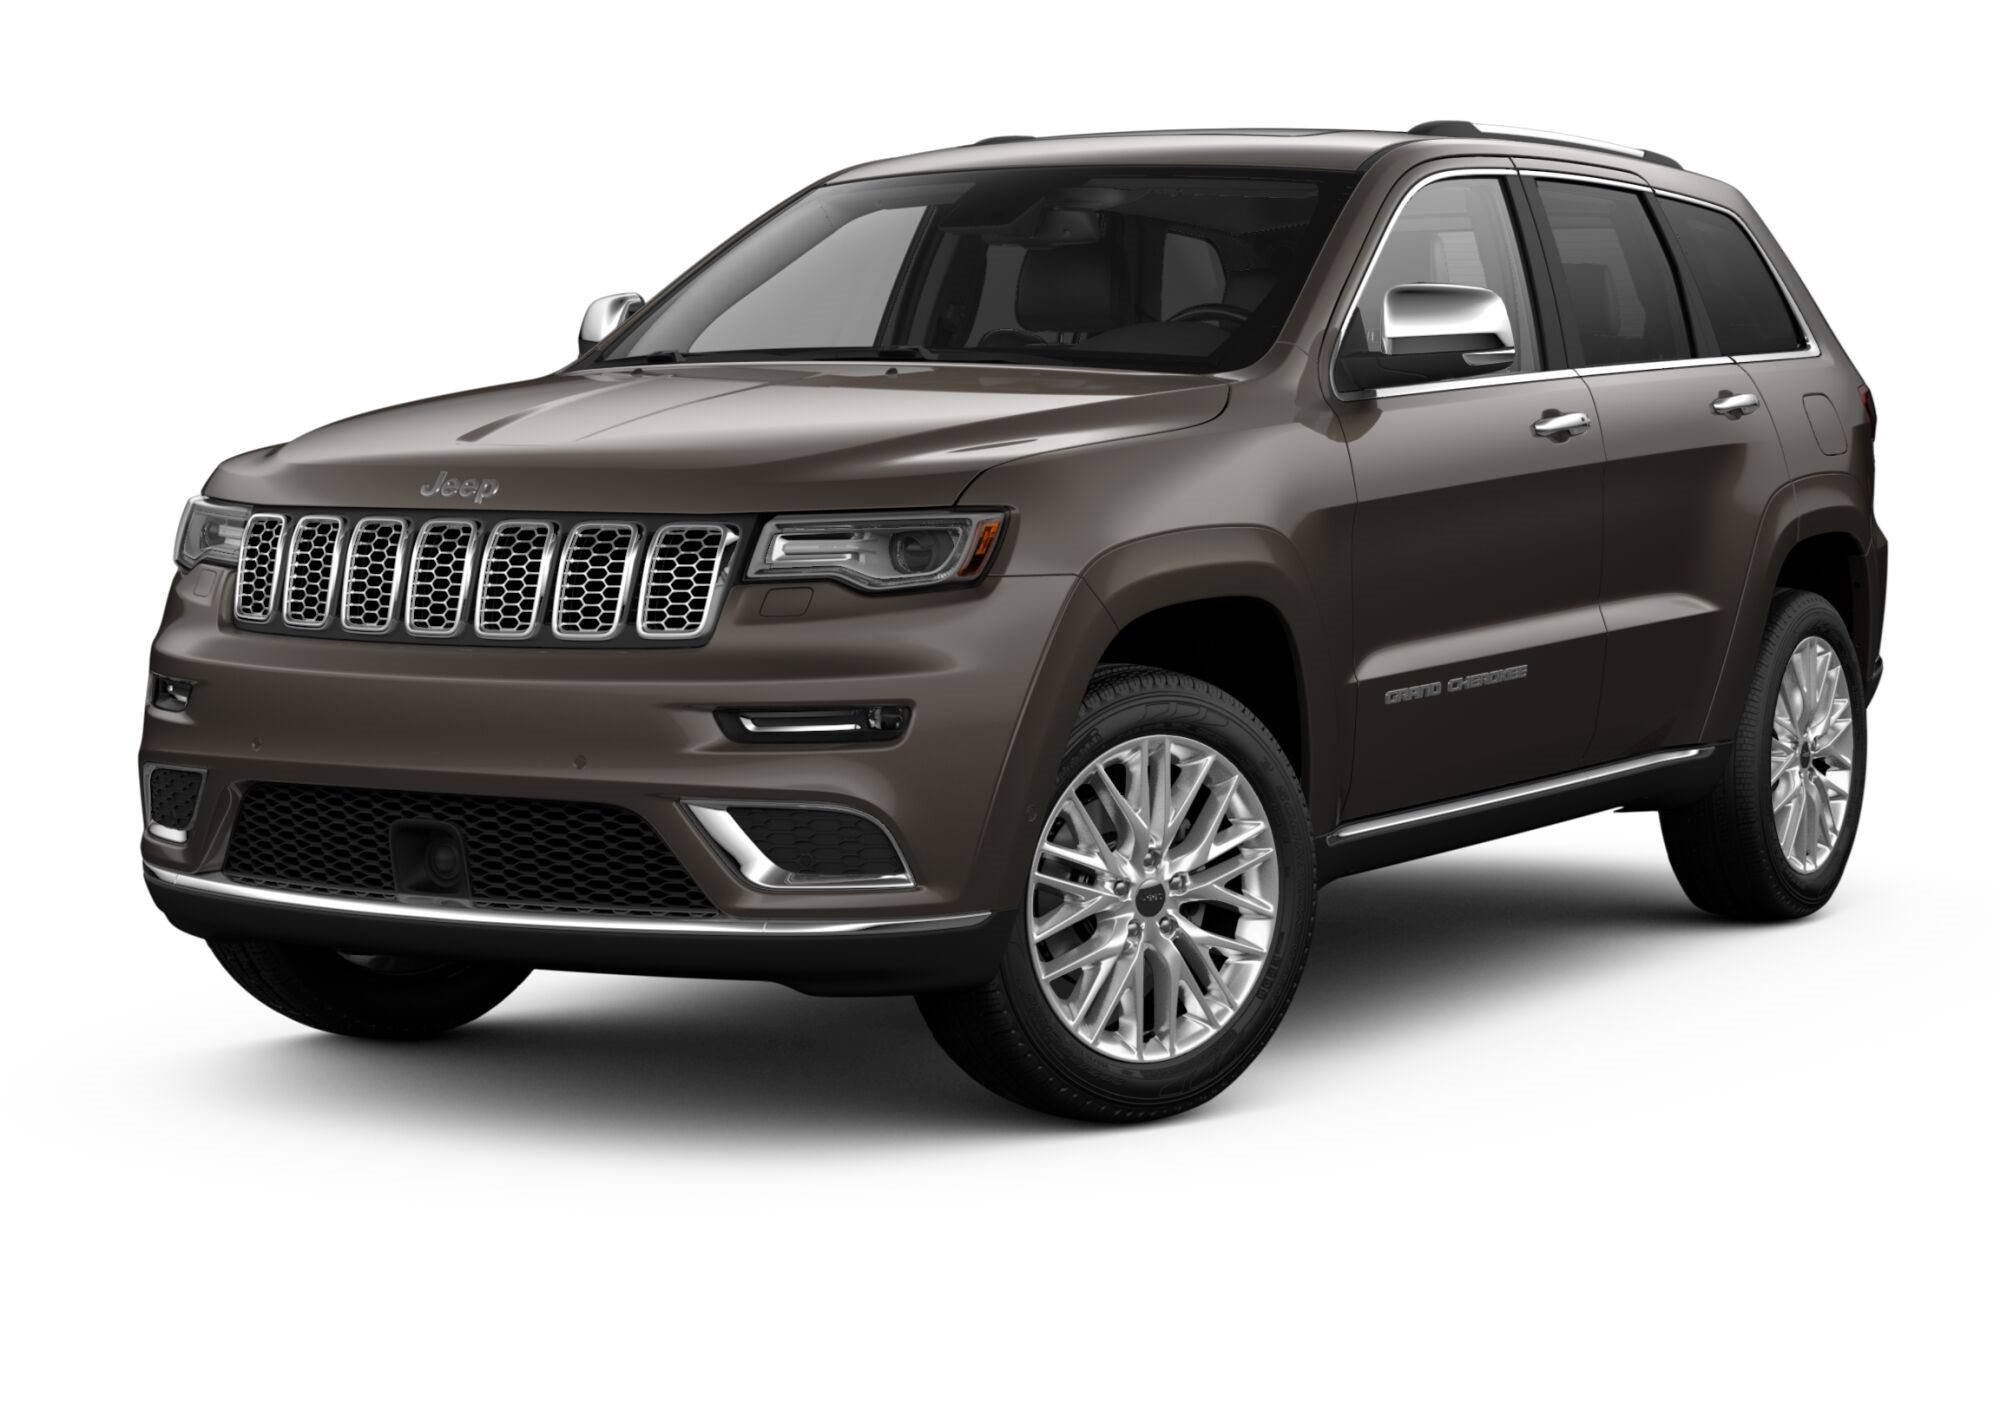 2018 Jeep Grand Cherokee High Altitude Full Specs, Features and Price